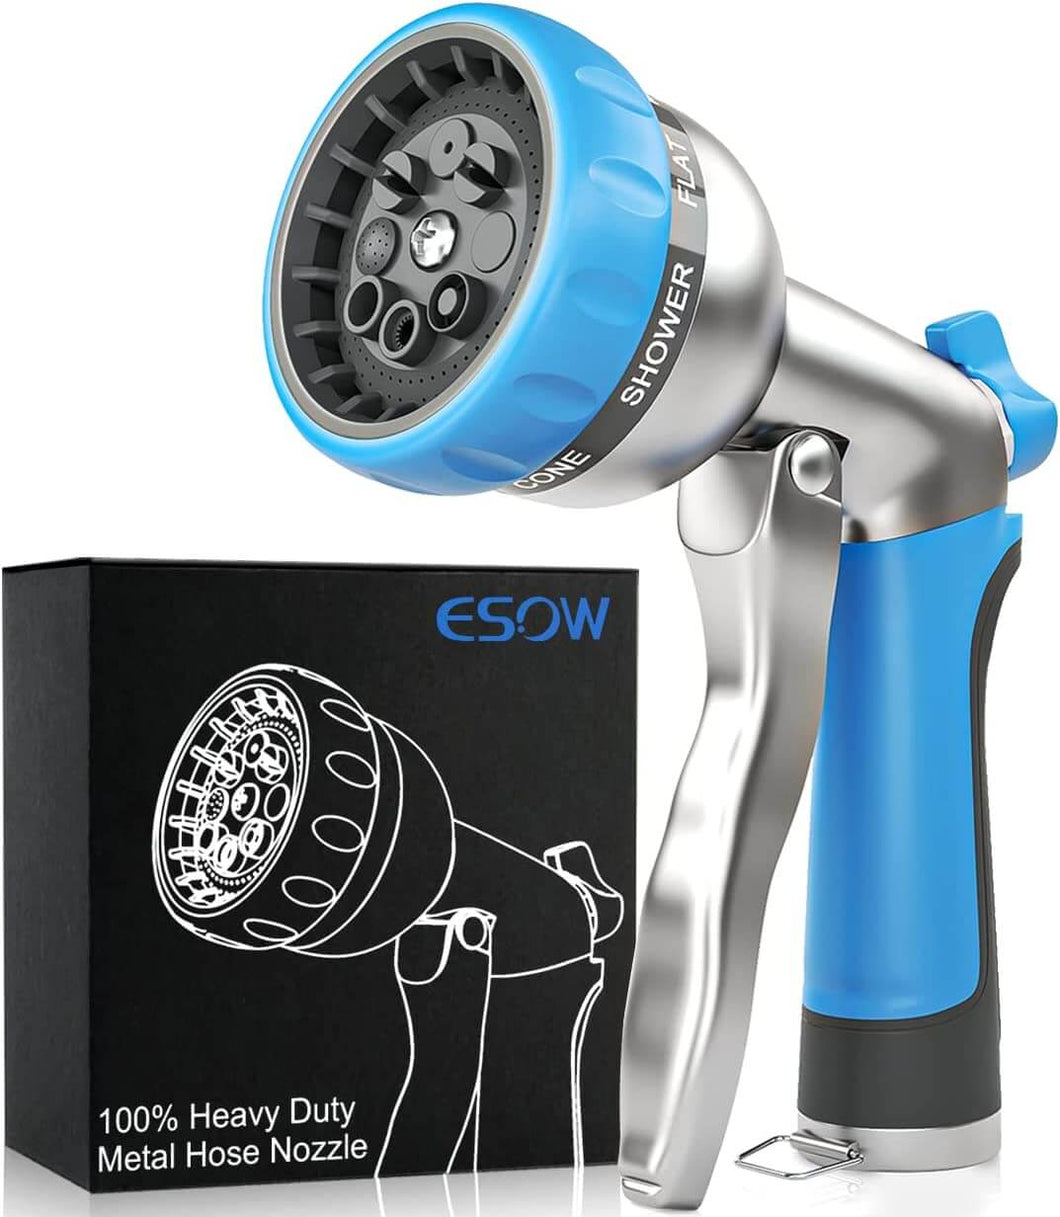 ESOW Garden Hose Nozzle Heavy Duty, 8 Adjustable Patterns Metal Water Hose Nozzle, High Pressure Hand Sprayer with Flow Control, Best for Watering Plant & Lawn, Pets Shower, Car Washing, Sky Blue